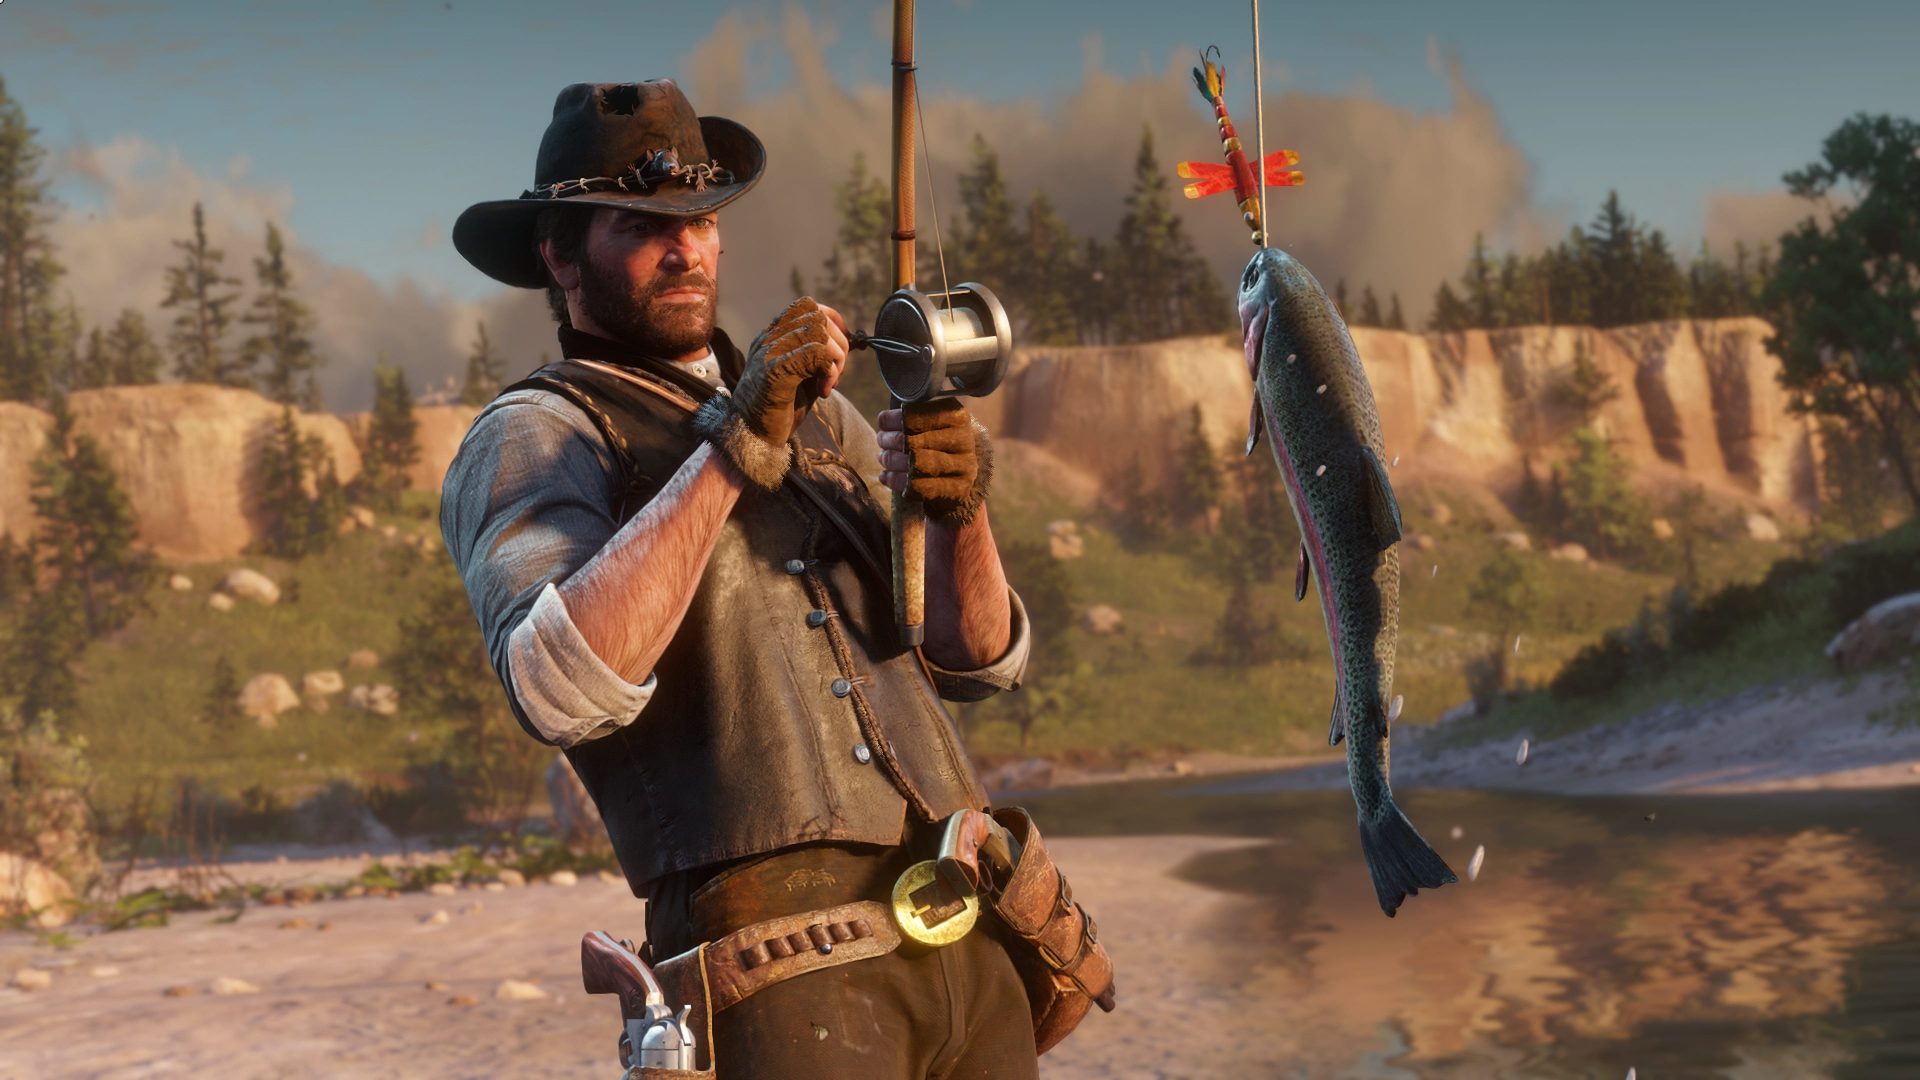 All About Red Dead Redemption 2's Wildlife, Horses, Hunting and